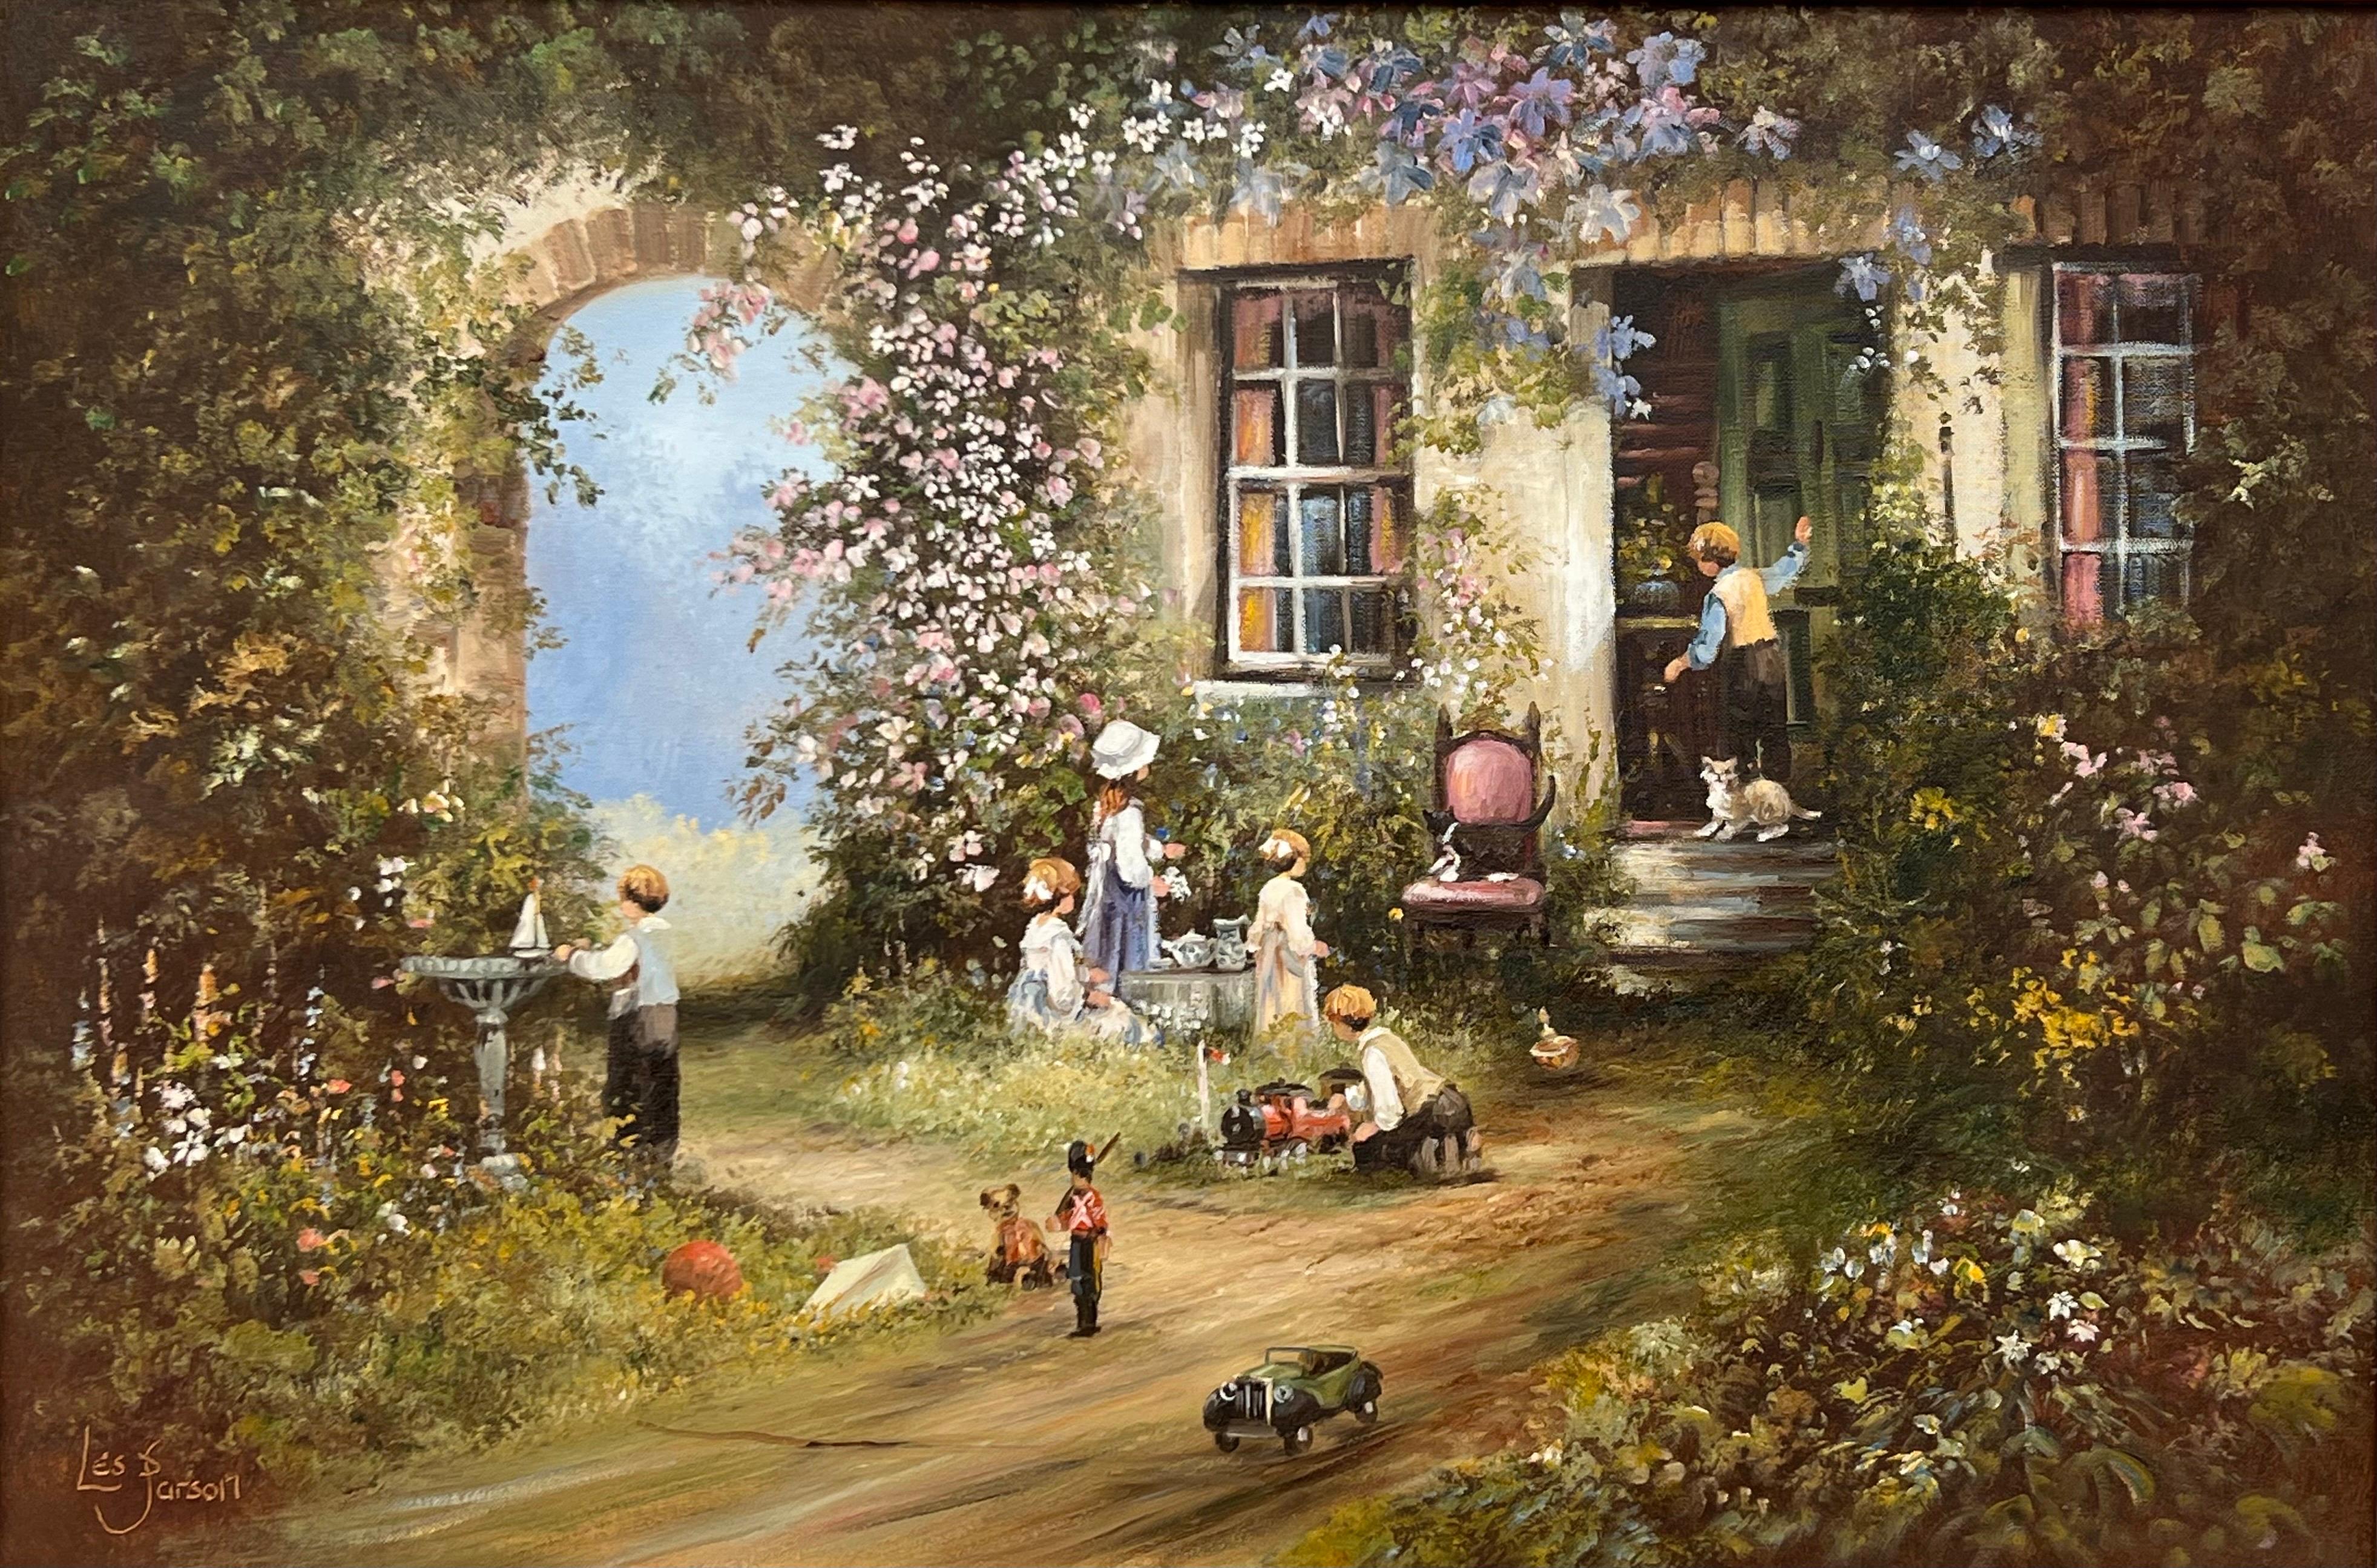 Children Playing in a Farmhouse Flower Garden in the English Countryside by British Artist, Les Parson

Art measures 30 x 20 inches
Frame measures 36 x 26 inches

This image depicts a picturesque and idyllic garden scene with several children